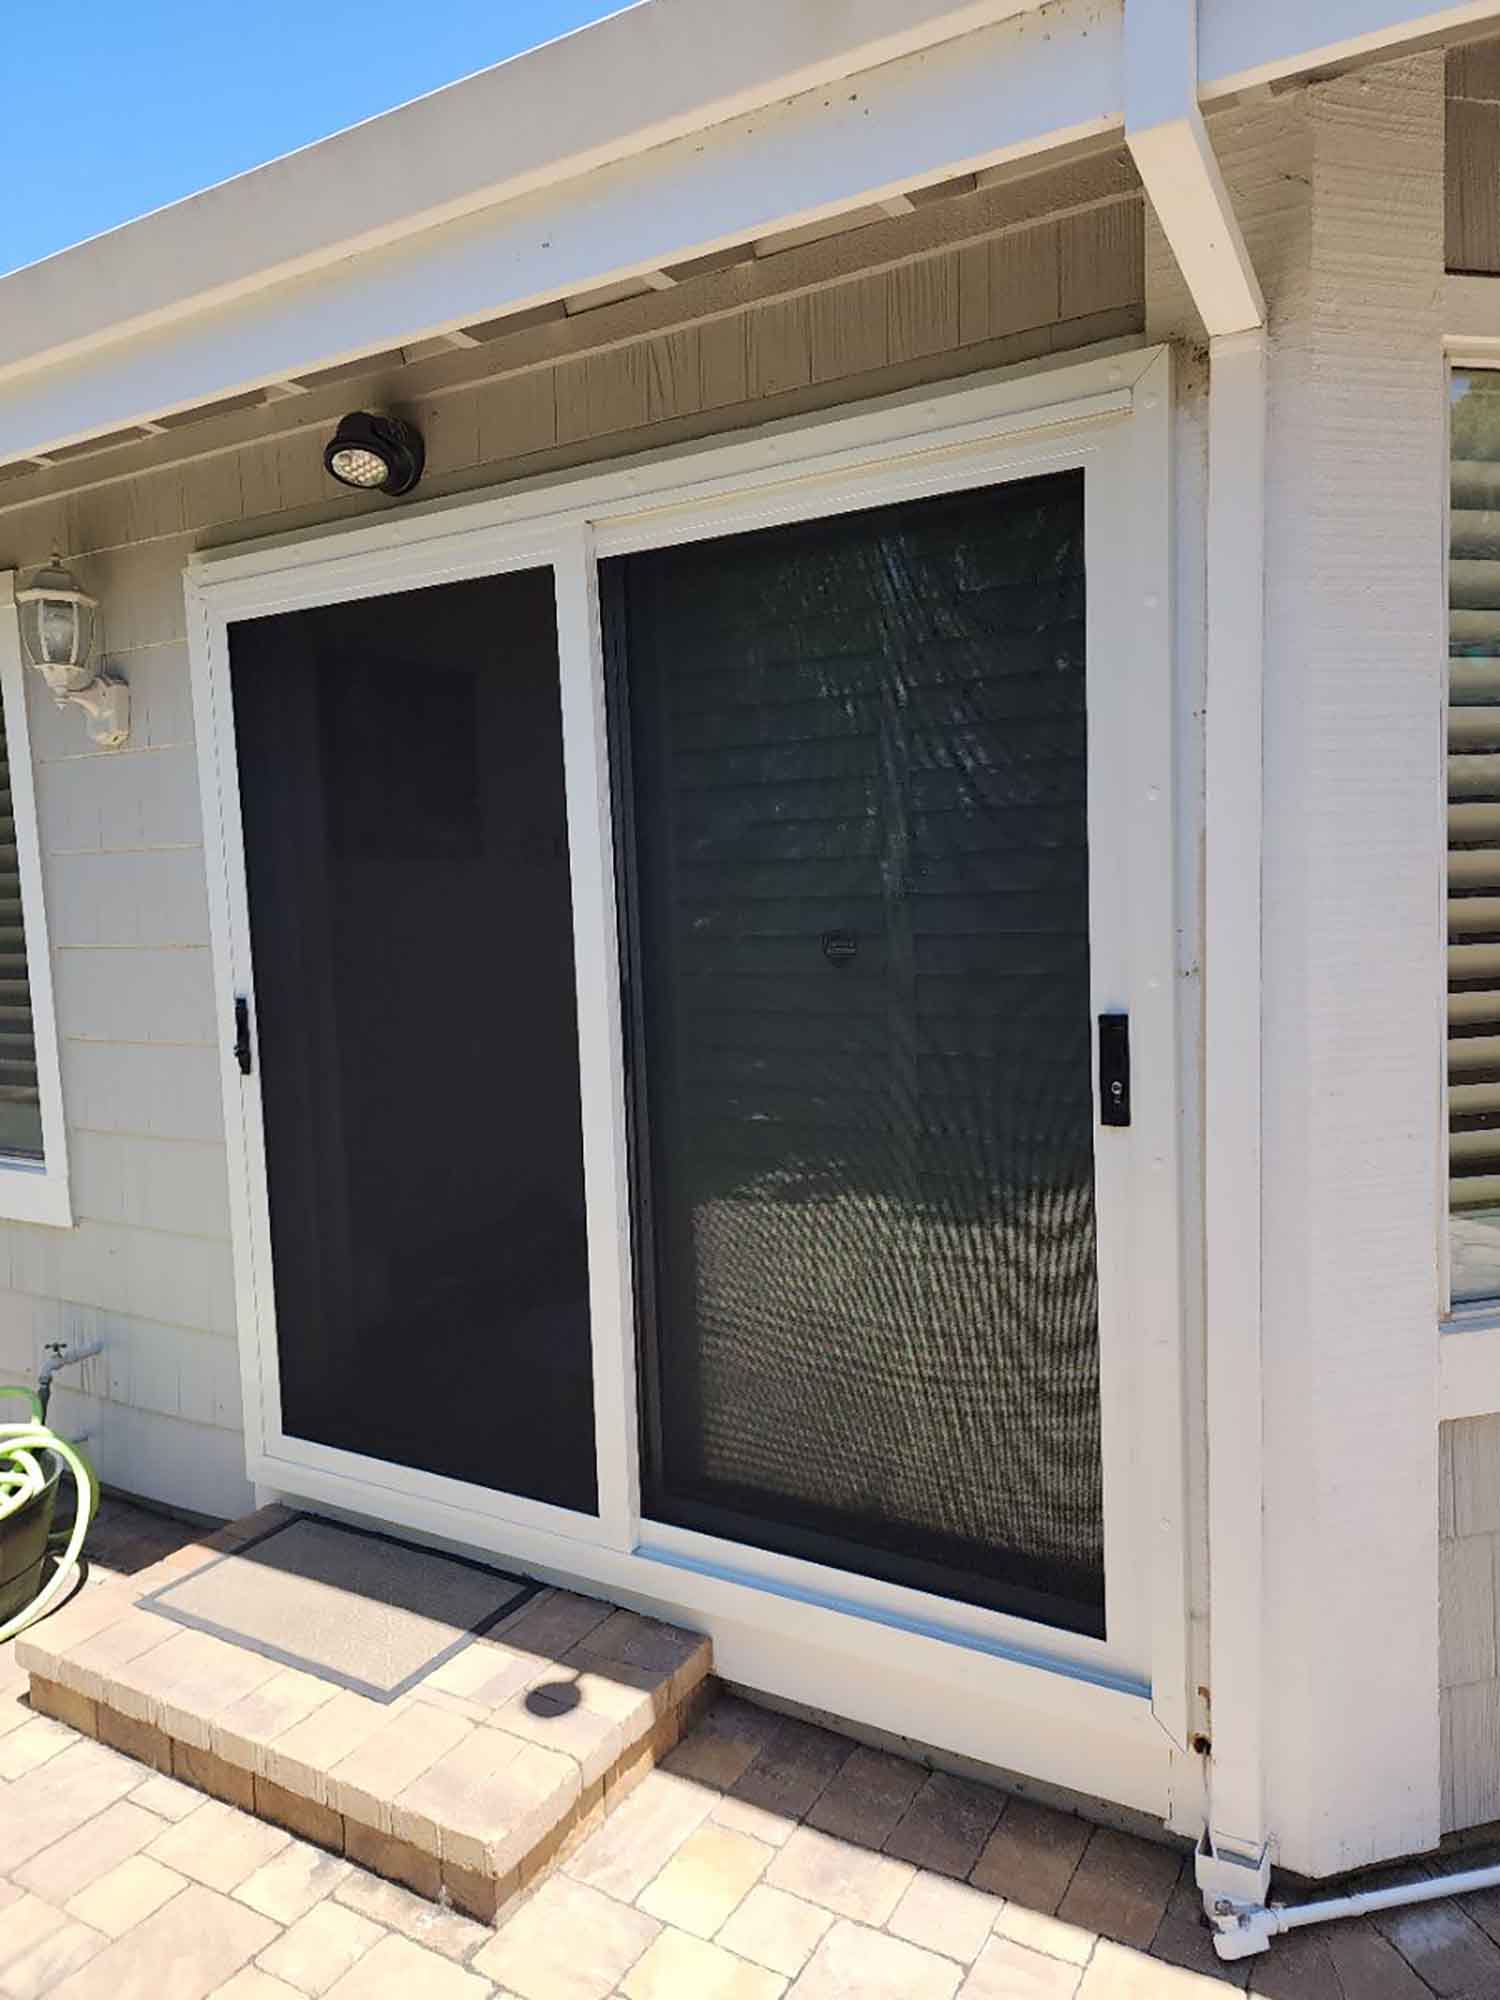 ClimatePro Secures Your Pleasanton Home with Crimsafe Security Screens. Get a free estimate for your Contra Costa County Home. Serving Danville, Pleasanton and San Ramon.